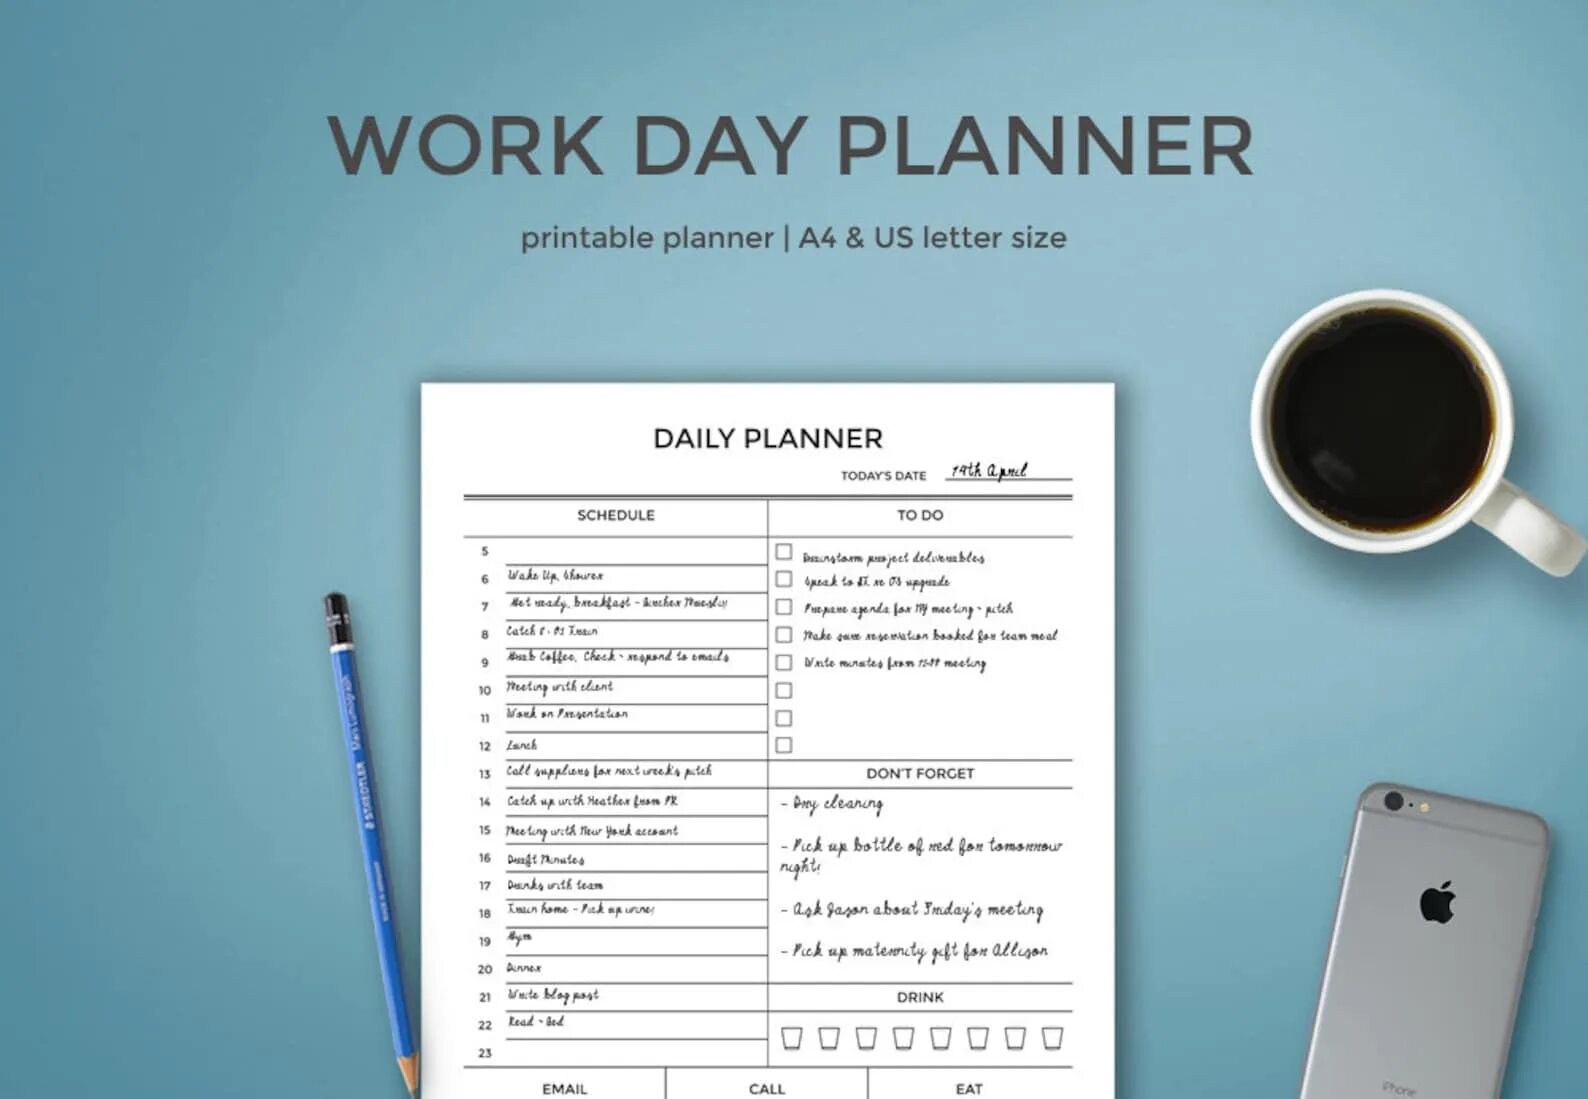 Daily Planner. Plan for the Day. Working Day Plan. Planner for Day.